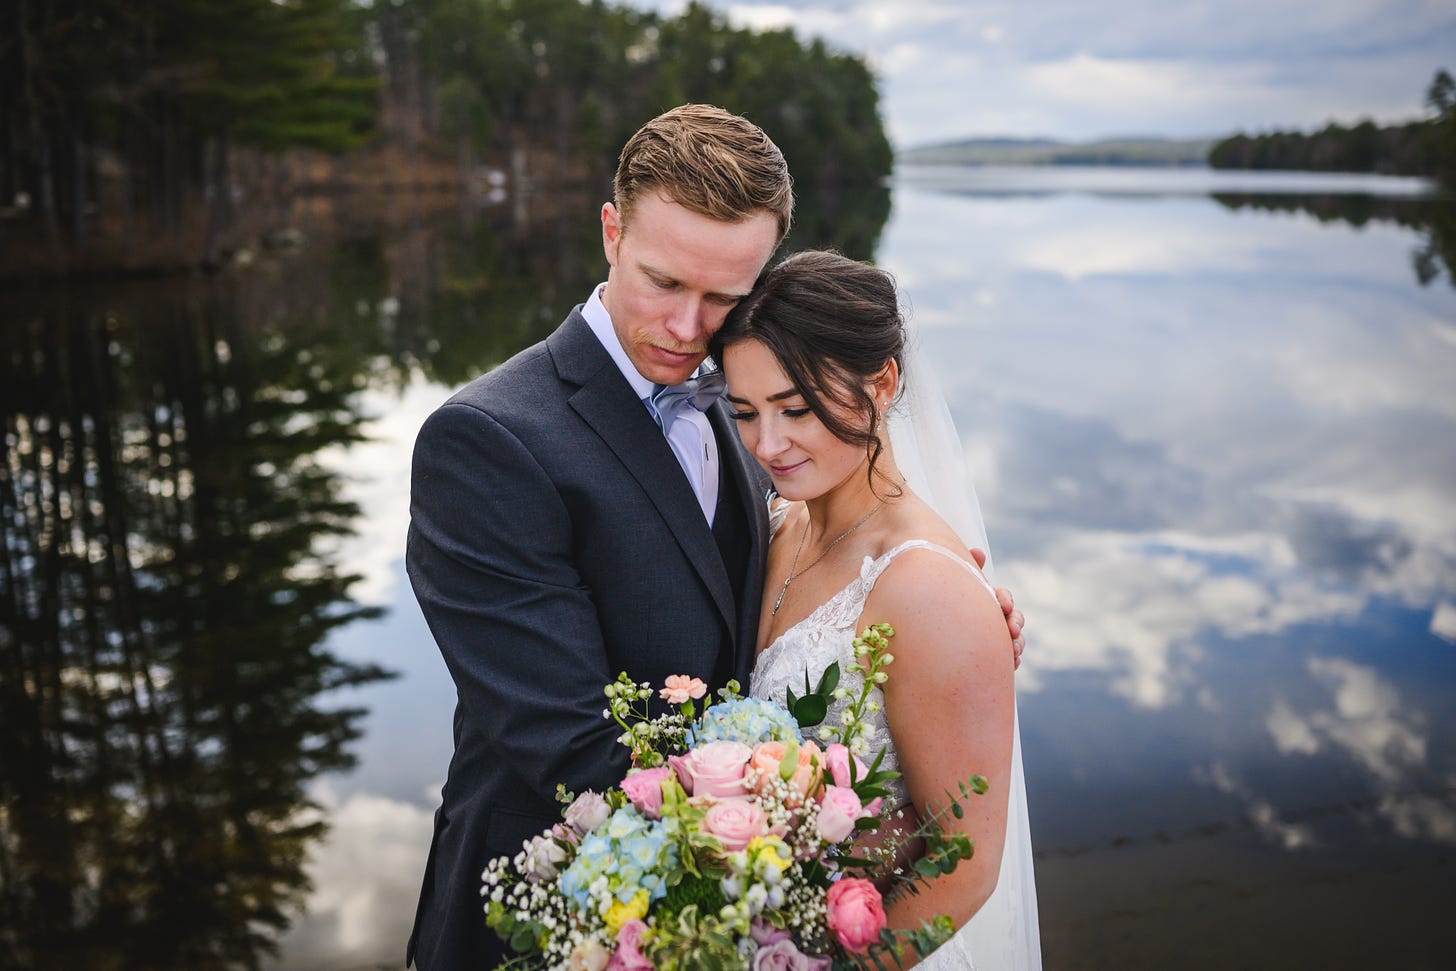 A bride and groom looking down in front of a picturesque lake with clouds reflecred in the water